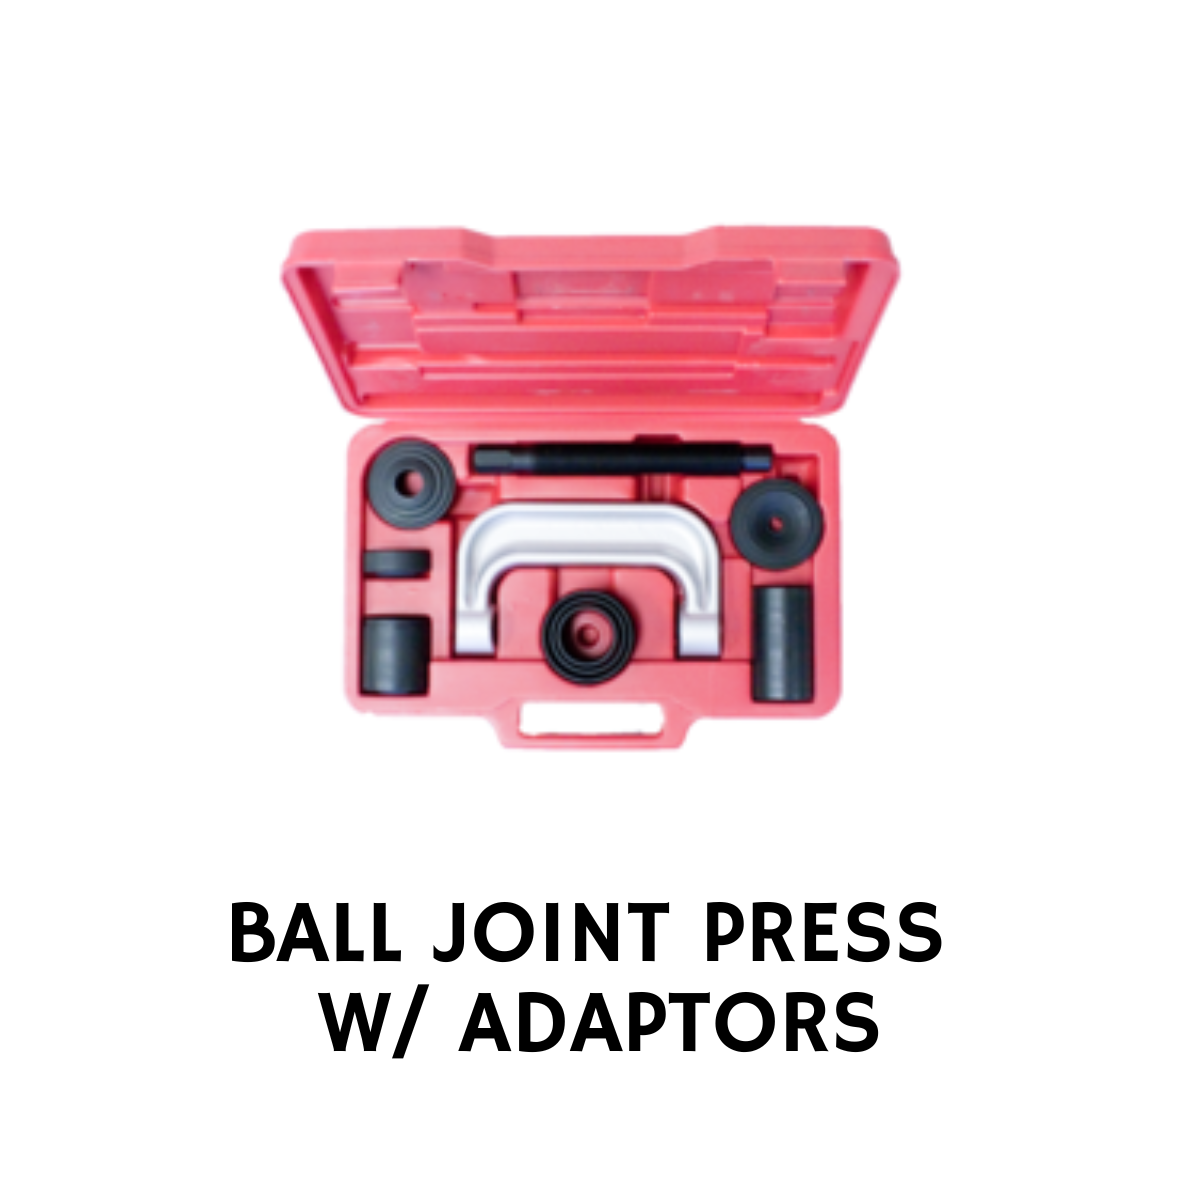 BALL JOINT PRESS WITH ADAPTORS